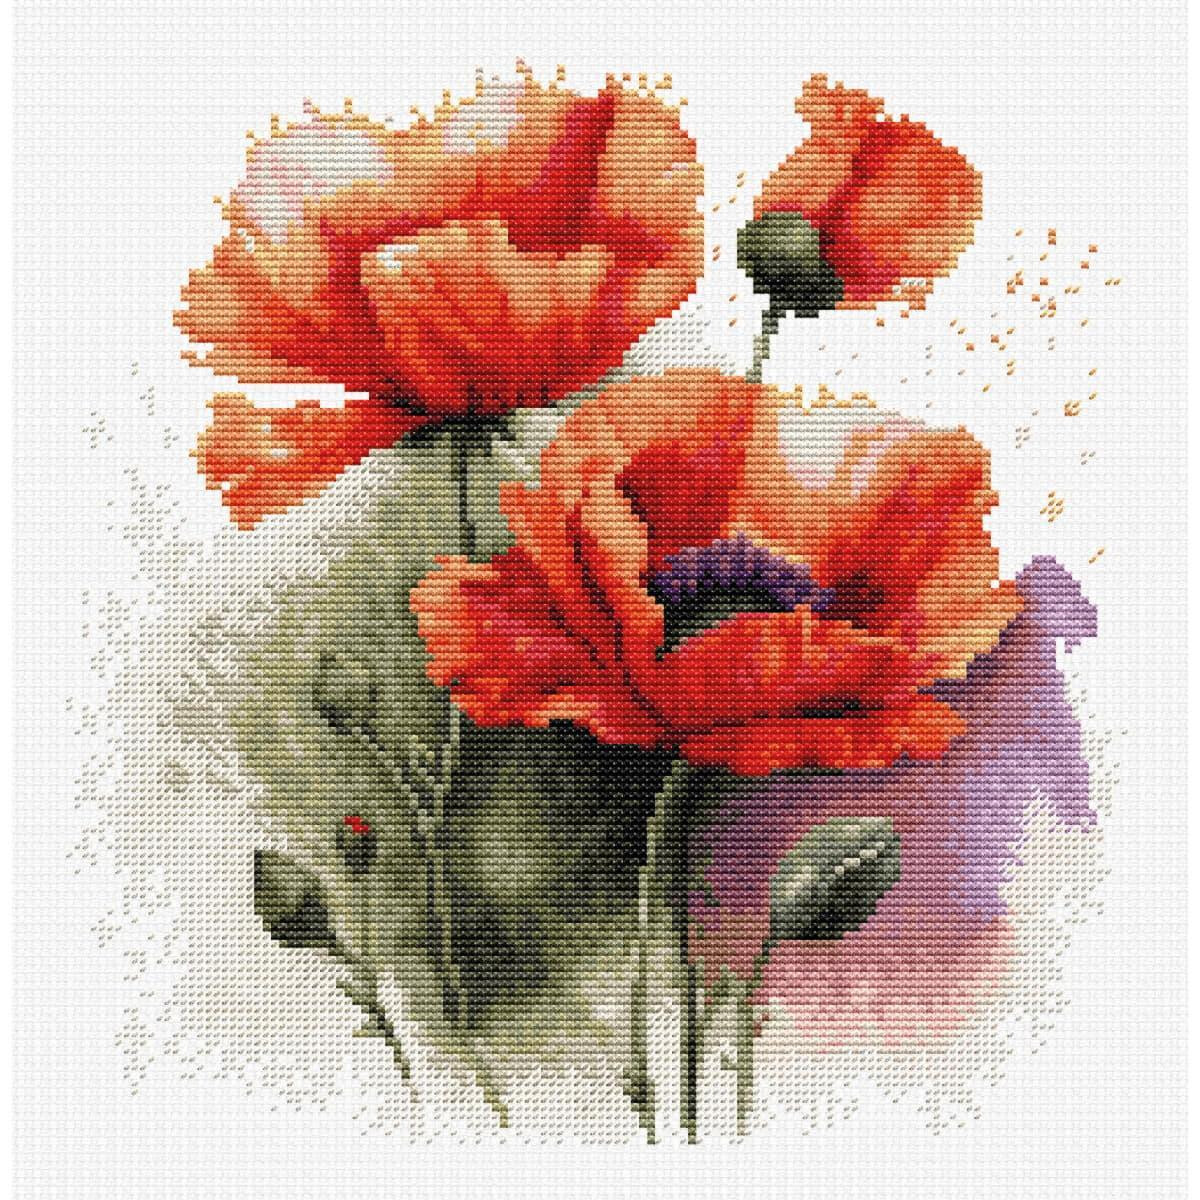 A detailed cross stitch depiction of bright red poppies...